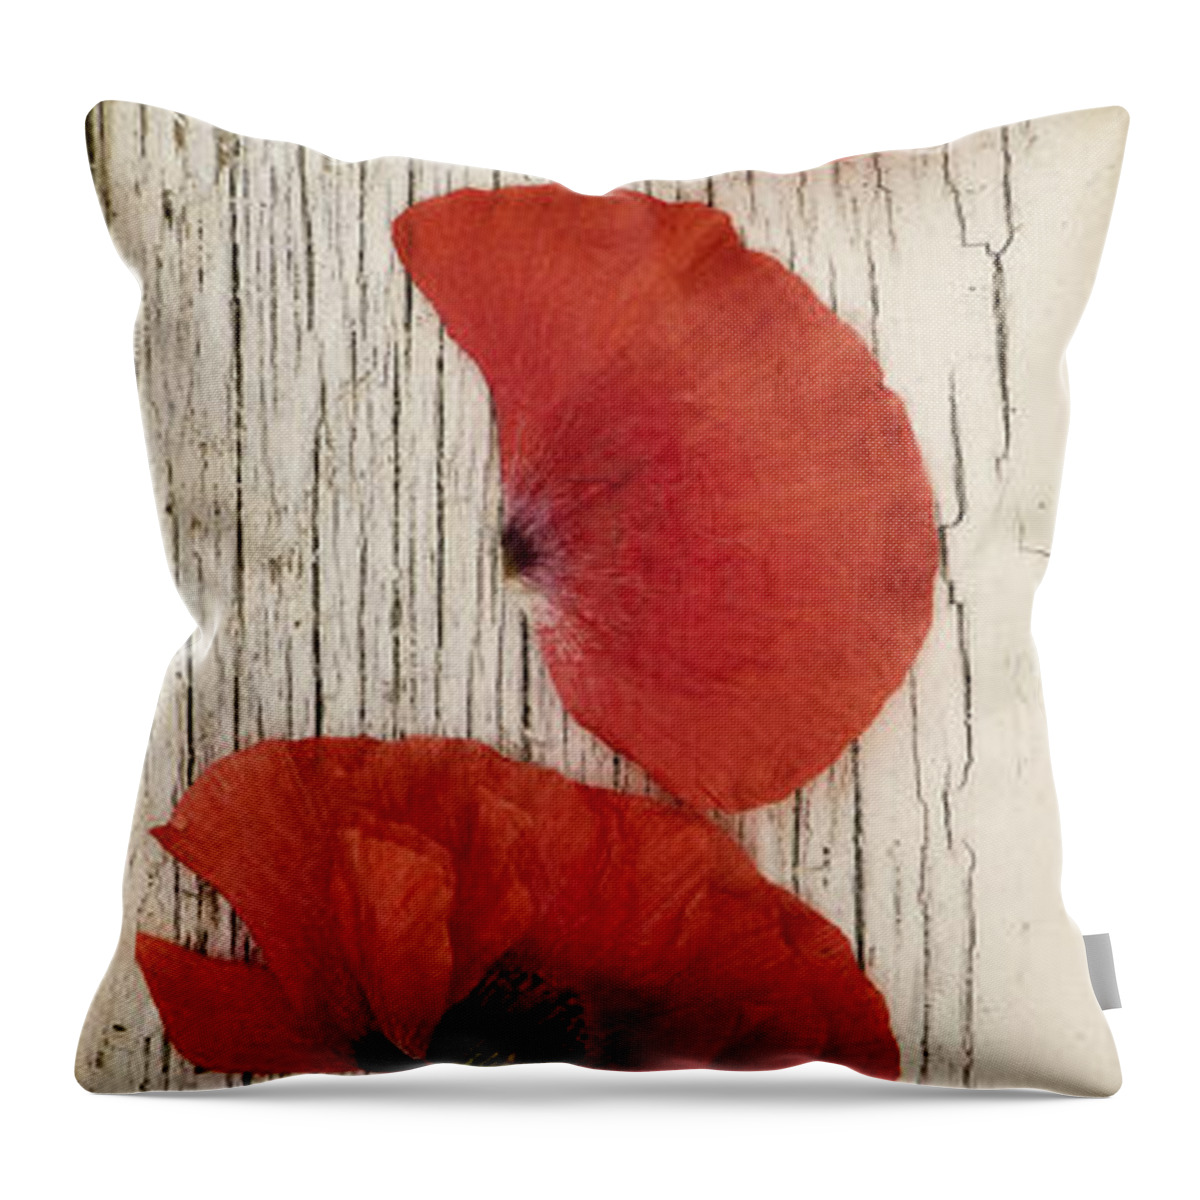 Popppy Throw Pillow featuring the photograph Memories Of A Summer Vertical by Priska Wettstein